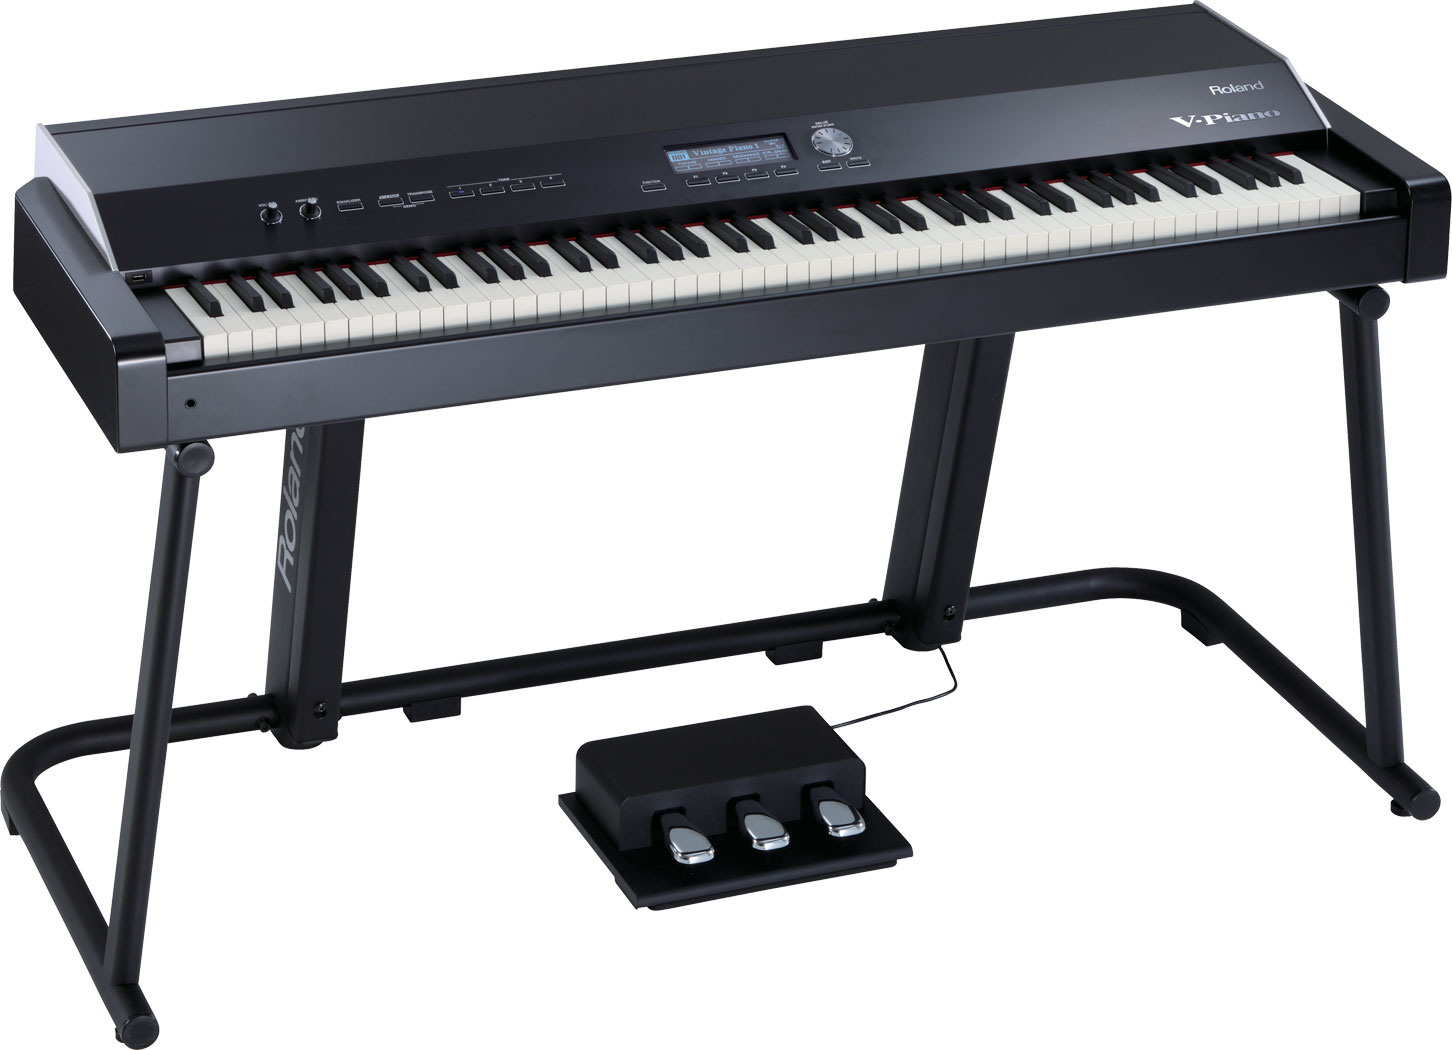 http://cdn.roland.com/assets/images/products/gallery/v_piano_angle_stand_gal.jpg